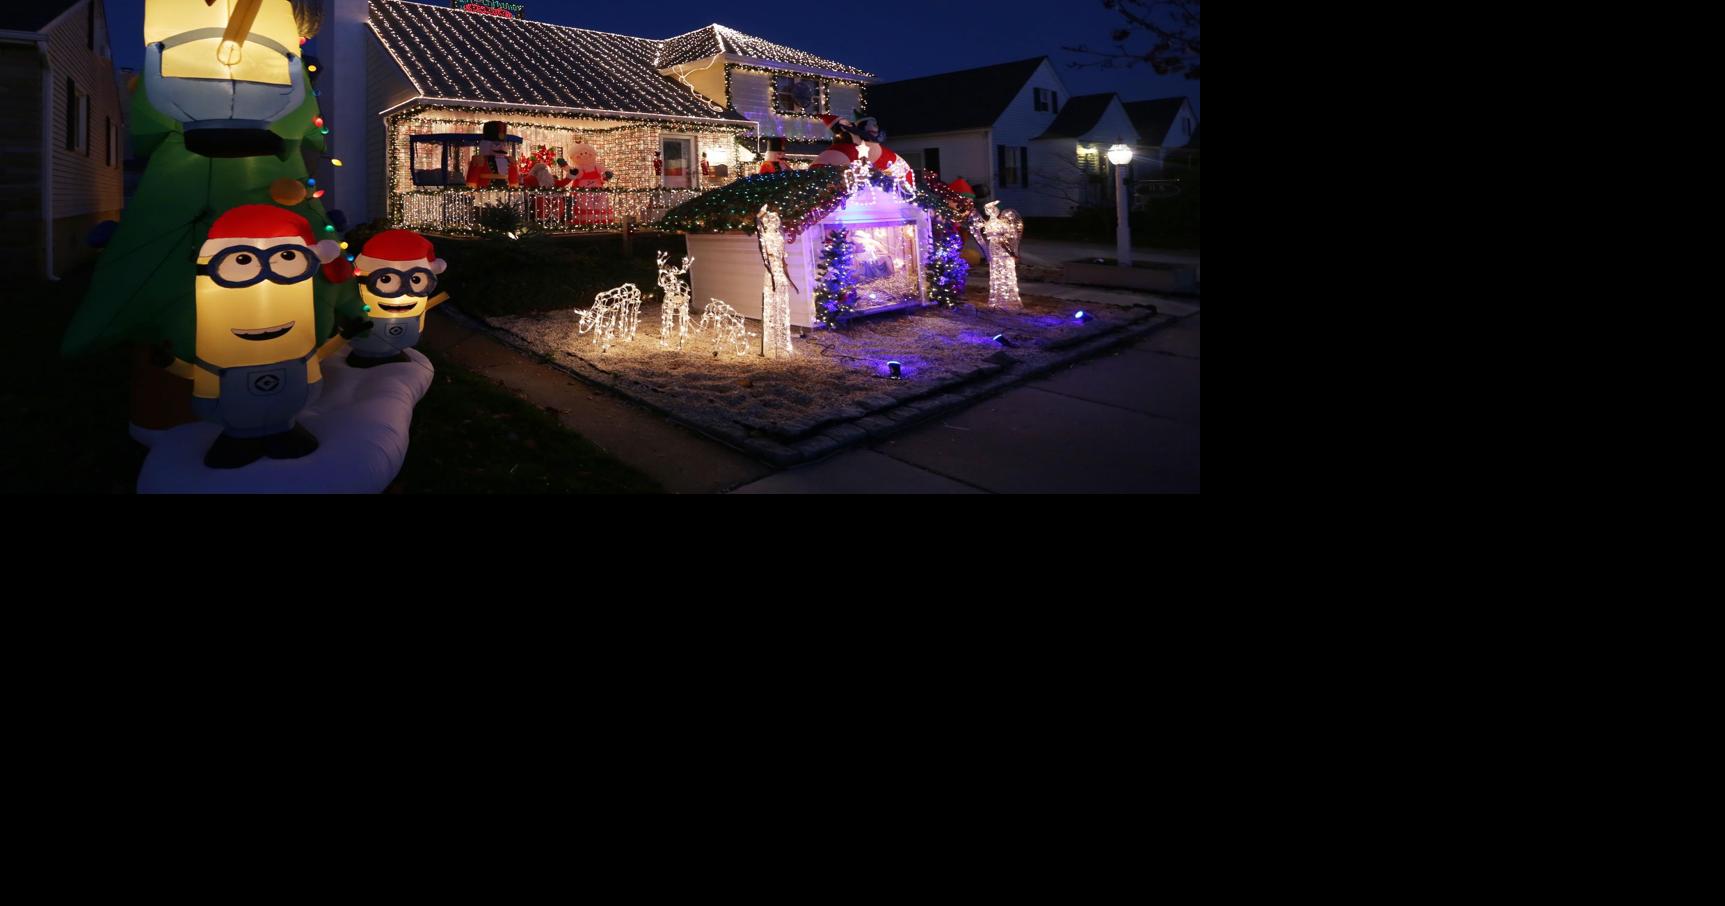 Photos: Christmas light displays in South Jersey